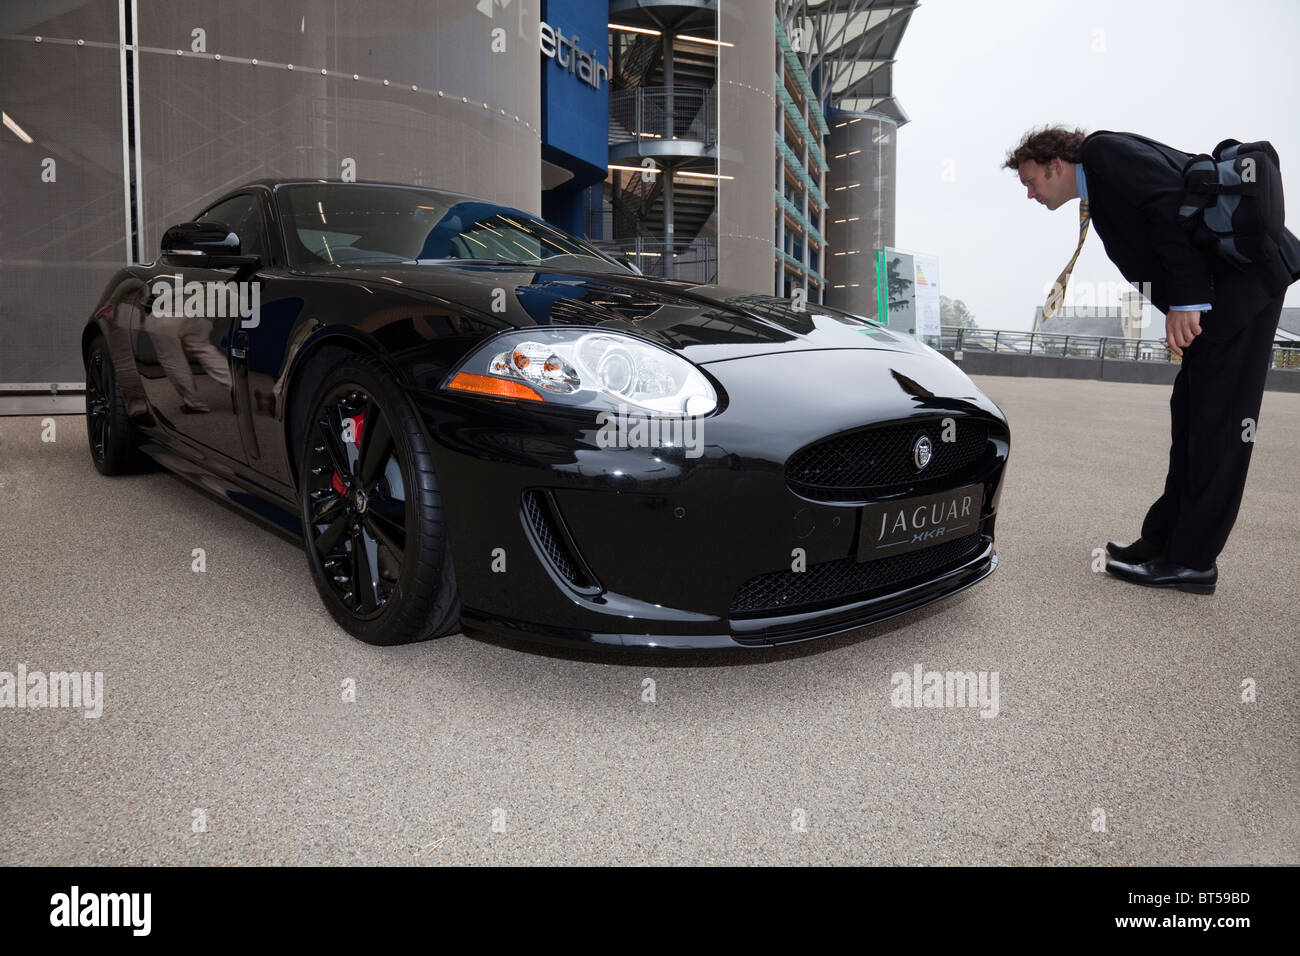 Jaguar XKR car being examined by man Stock Photo